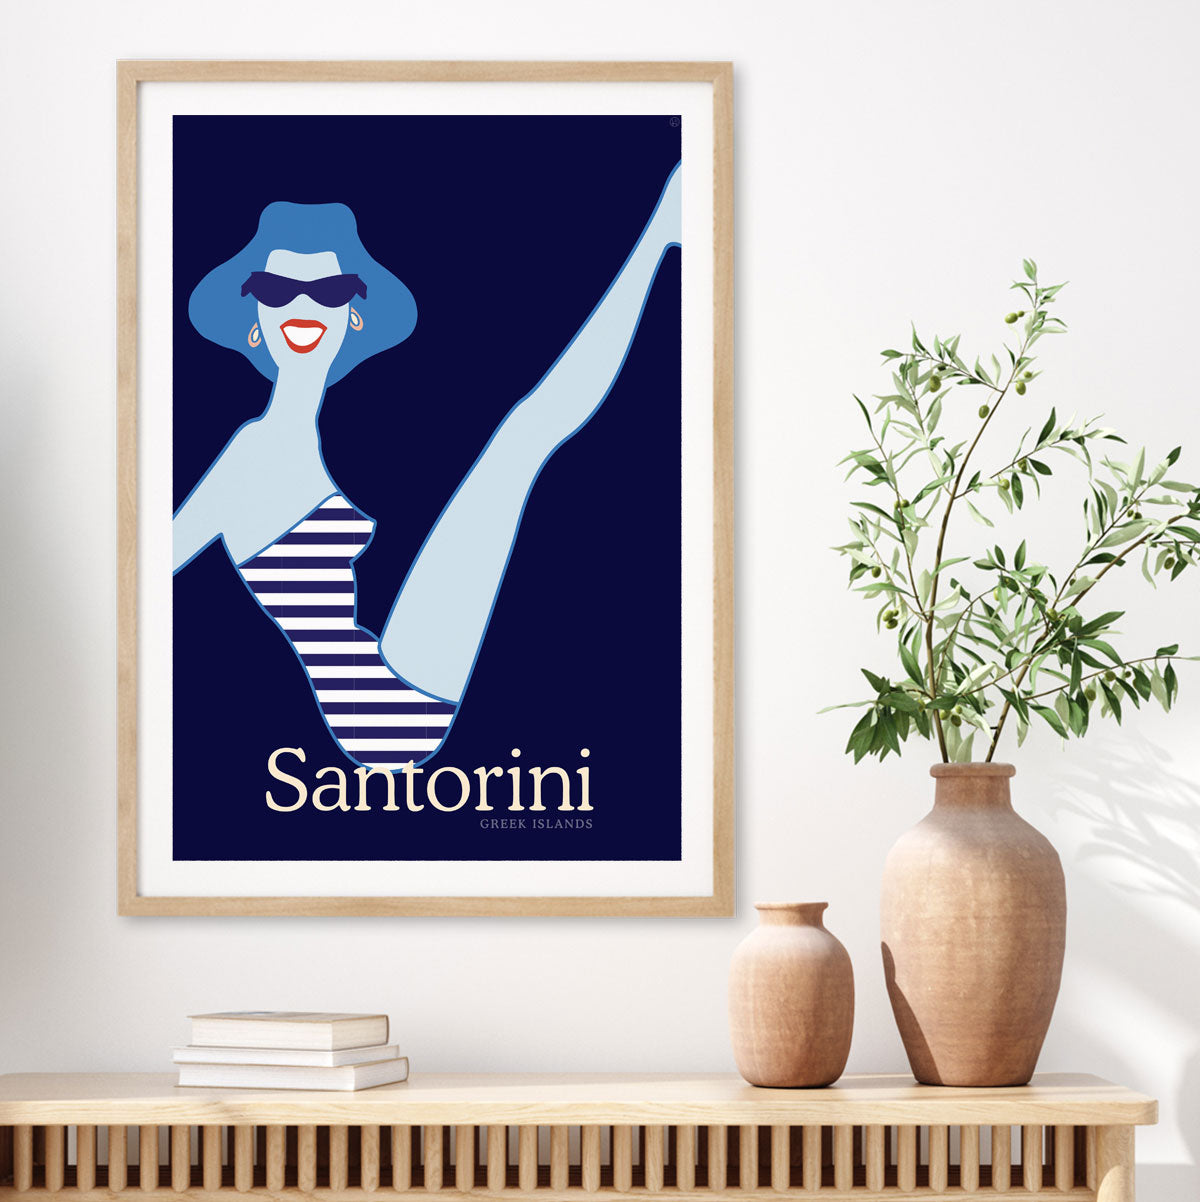 Santorini retro vintage beach gal poster from Places We Luv